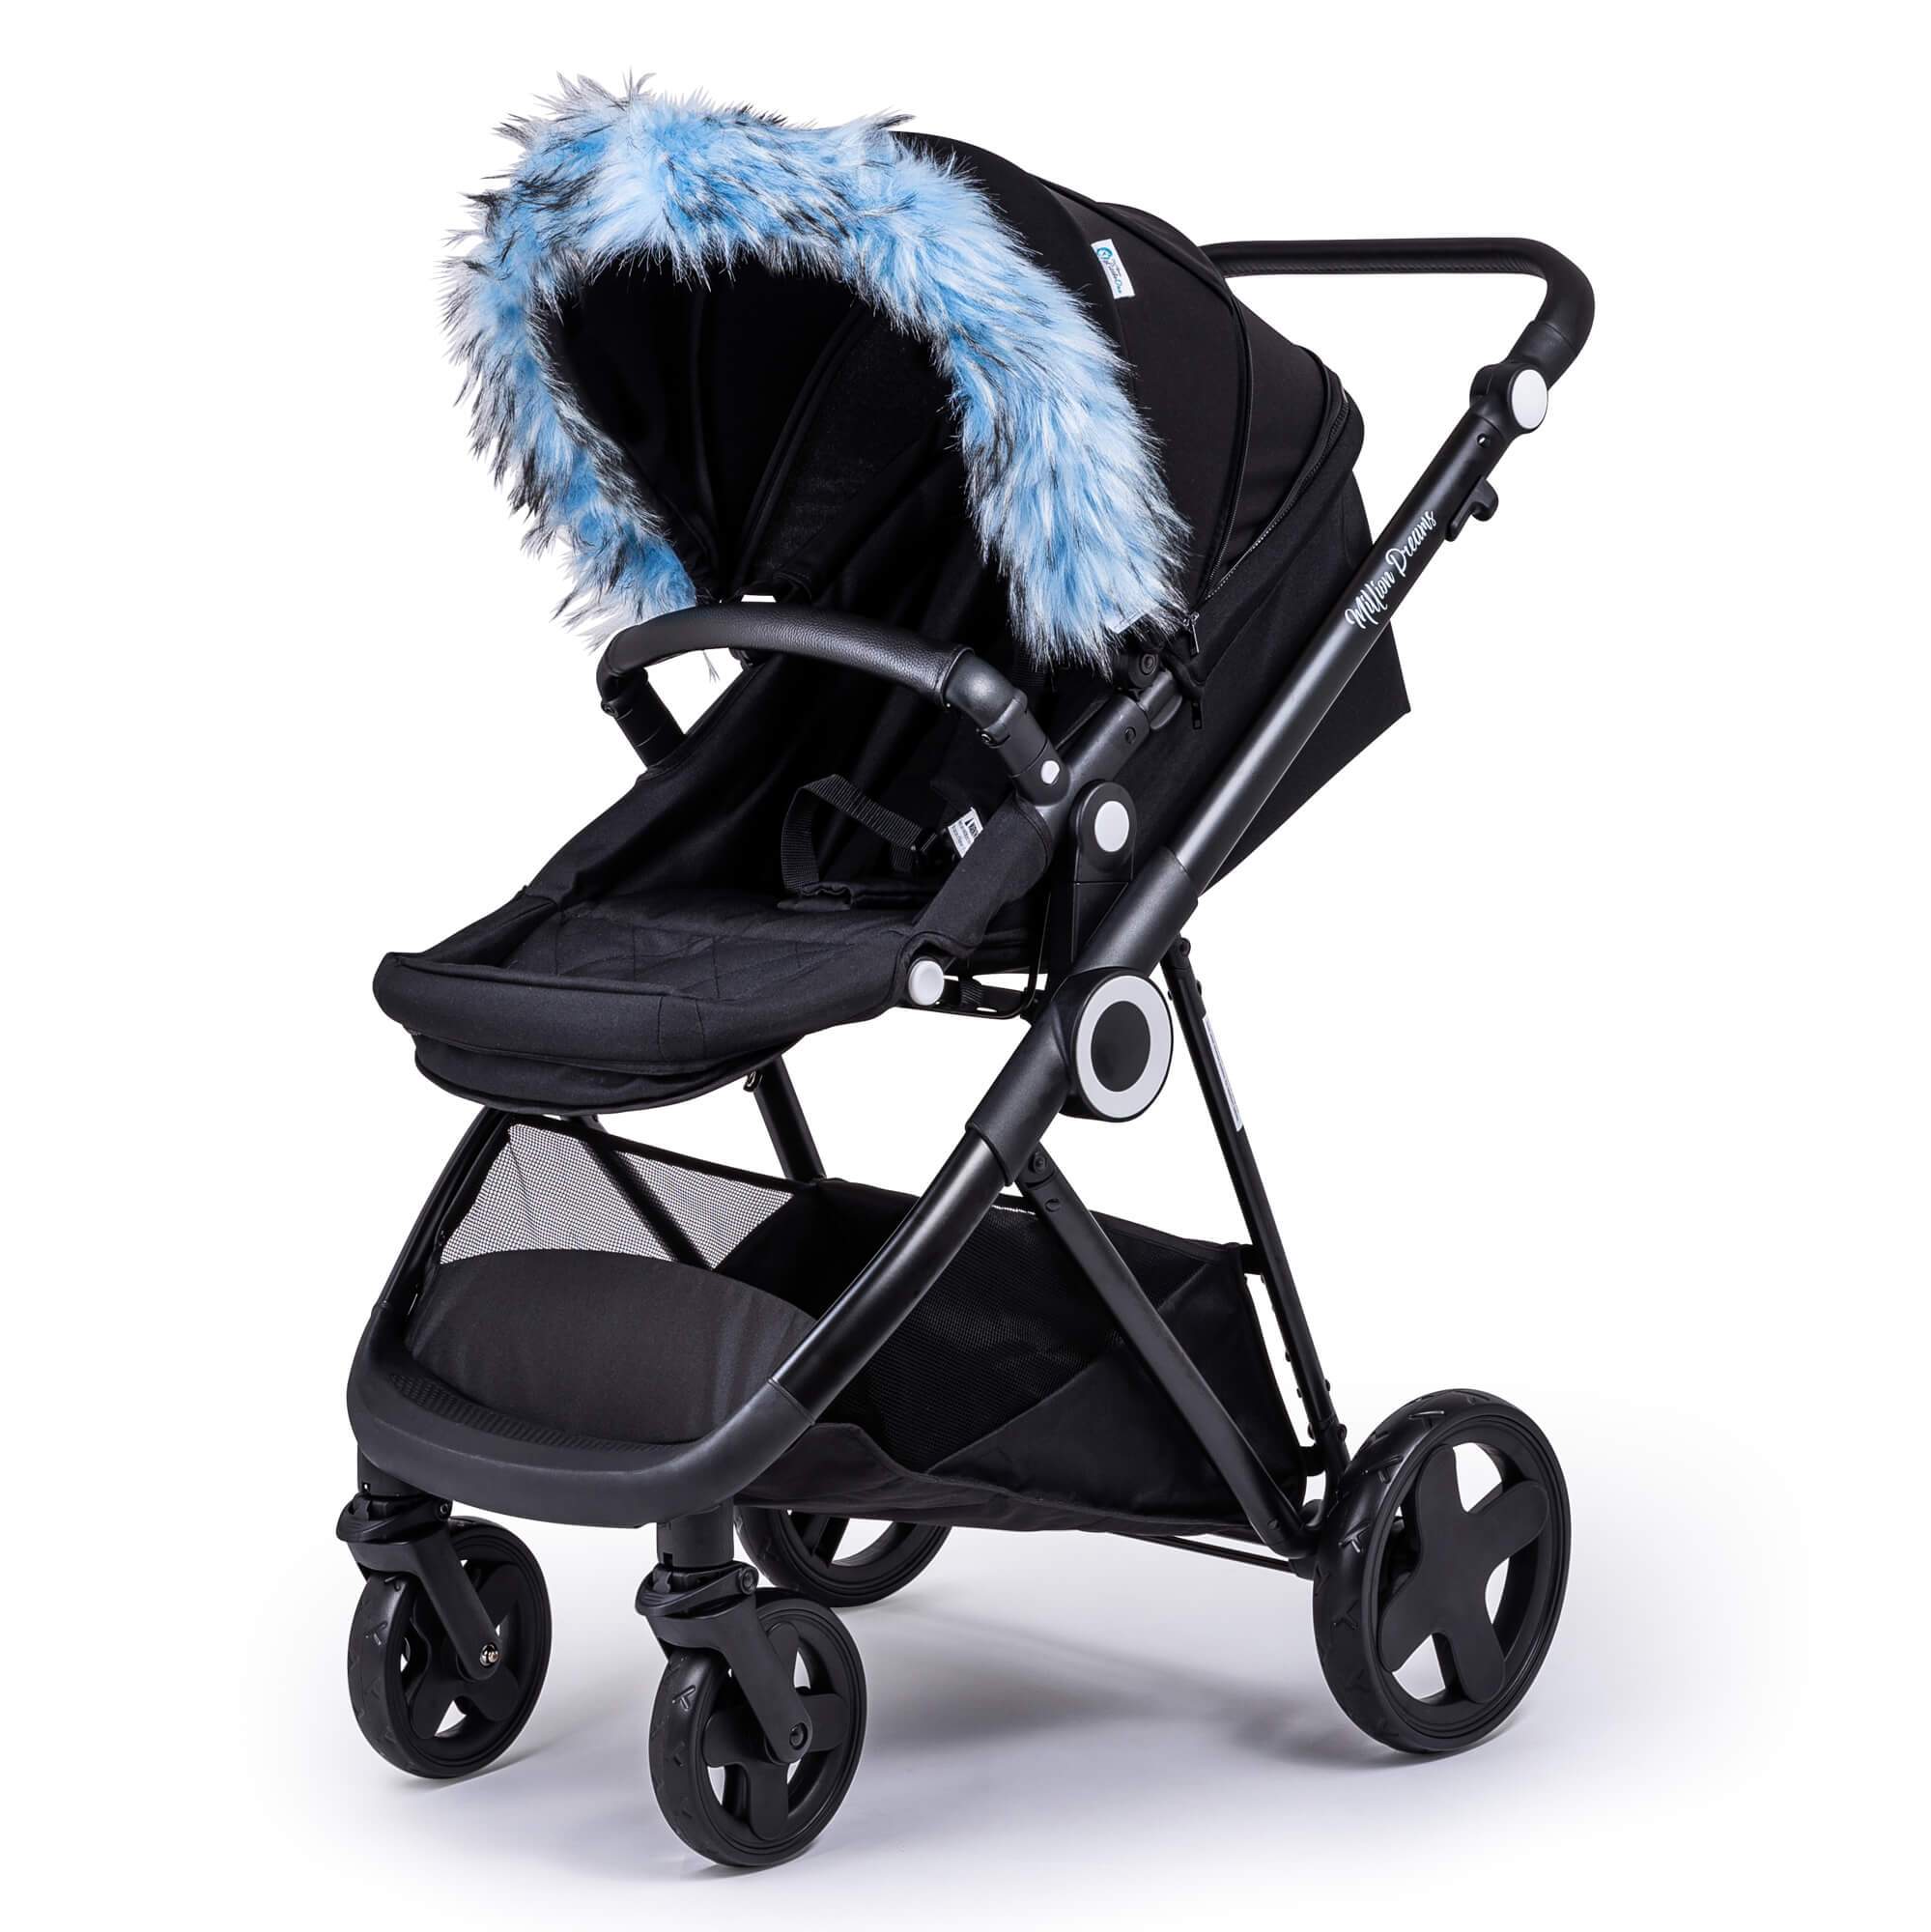 Pram Fur Hood Trim Attachment for Pushchair Compatible with ABC Design - Light Blue / Fits All Models | For Your Little One